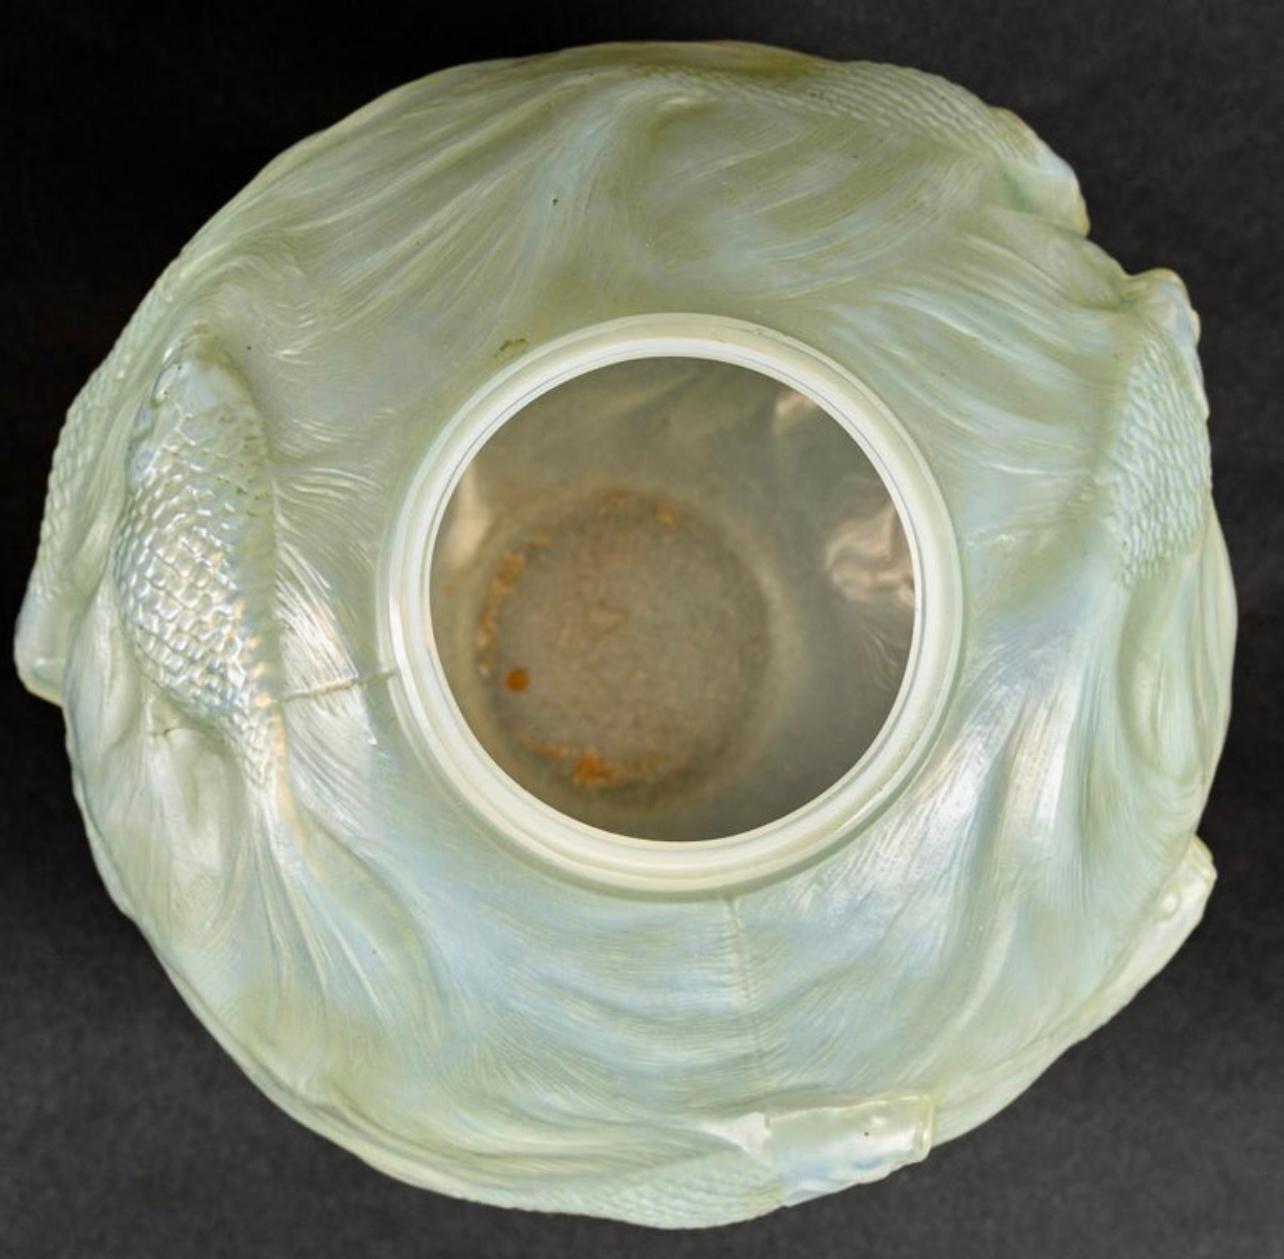 French 1924 Rene Lalique Vase Formose Cased Opalescent Glass with Lime Green Patina